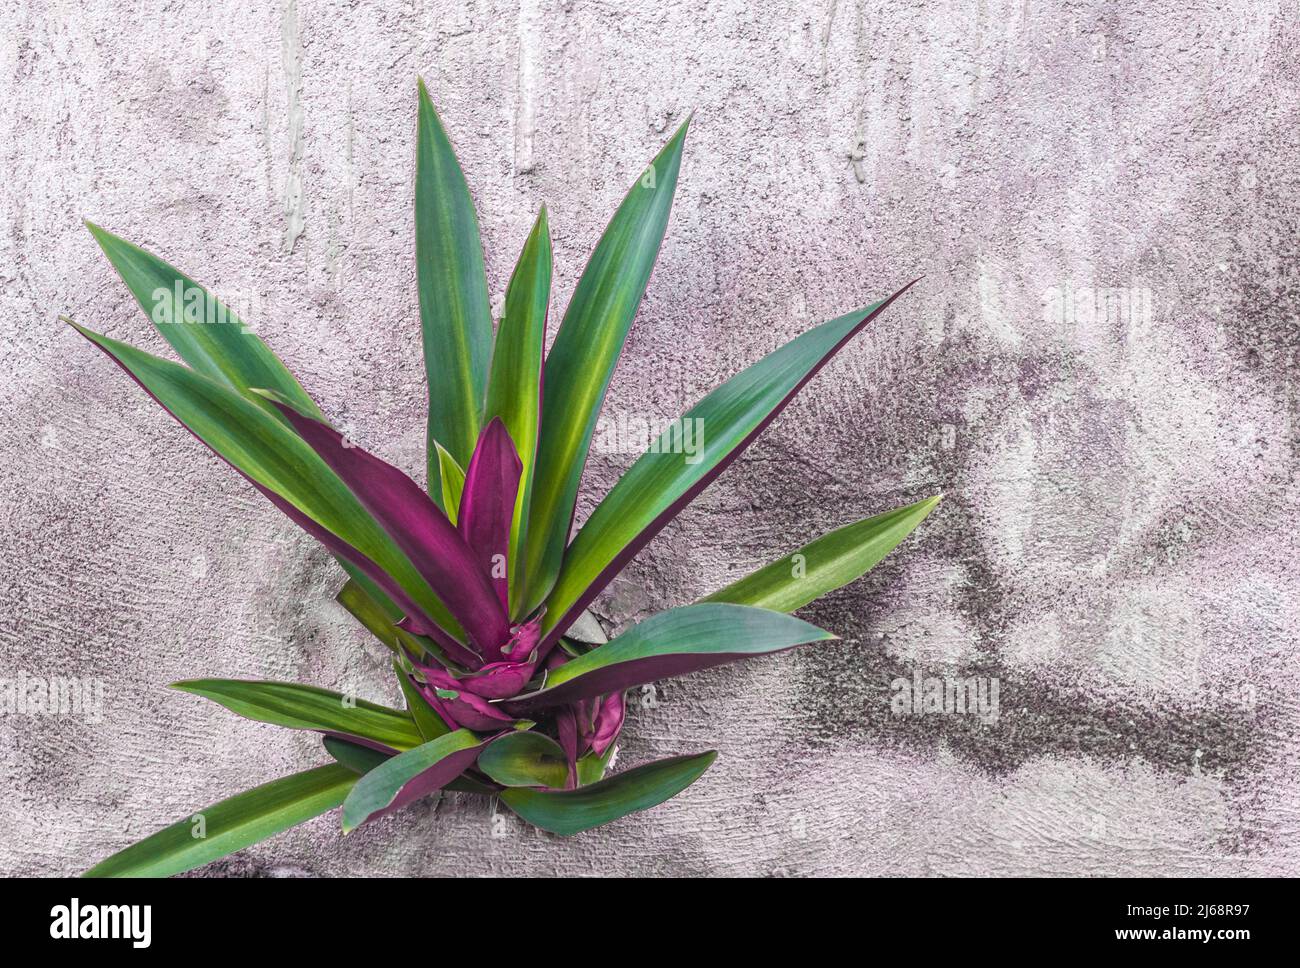 Green and magenta colored full plant growing out of crack in gray concrete wall. Copy space Stock Photo